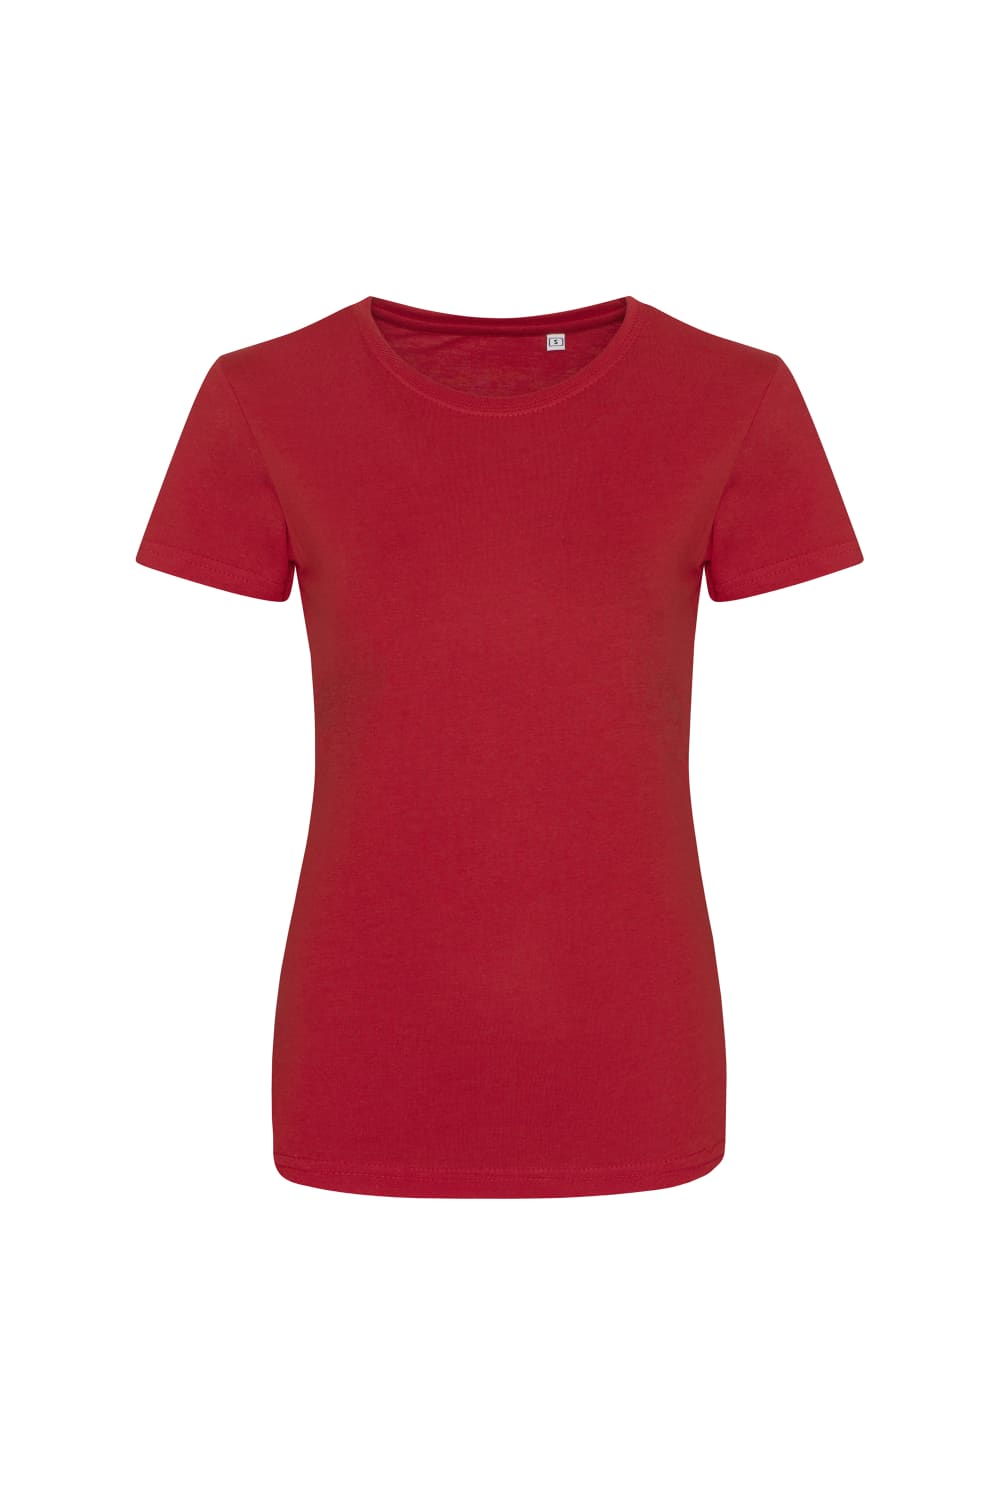 Womens/Ladies Girlie Tri-Blend T-Shirt - Solid Red